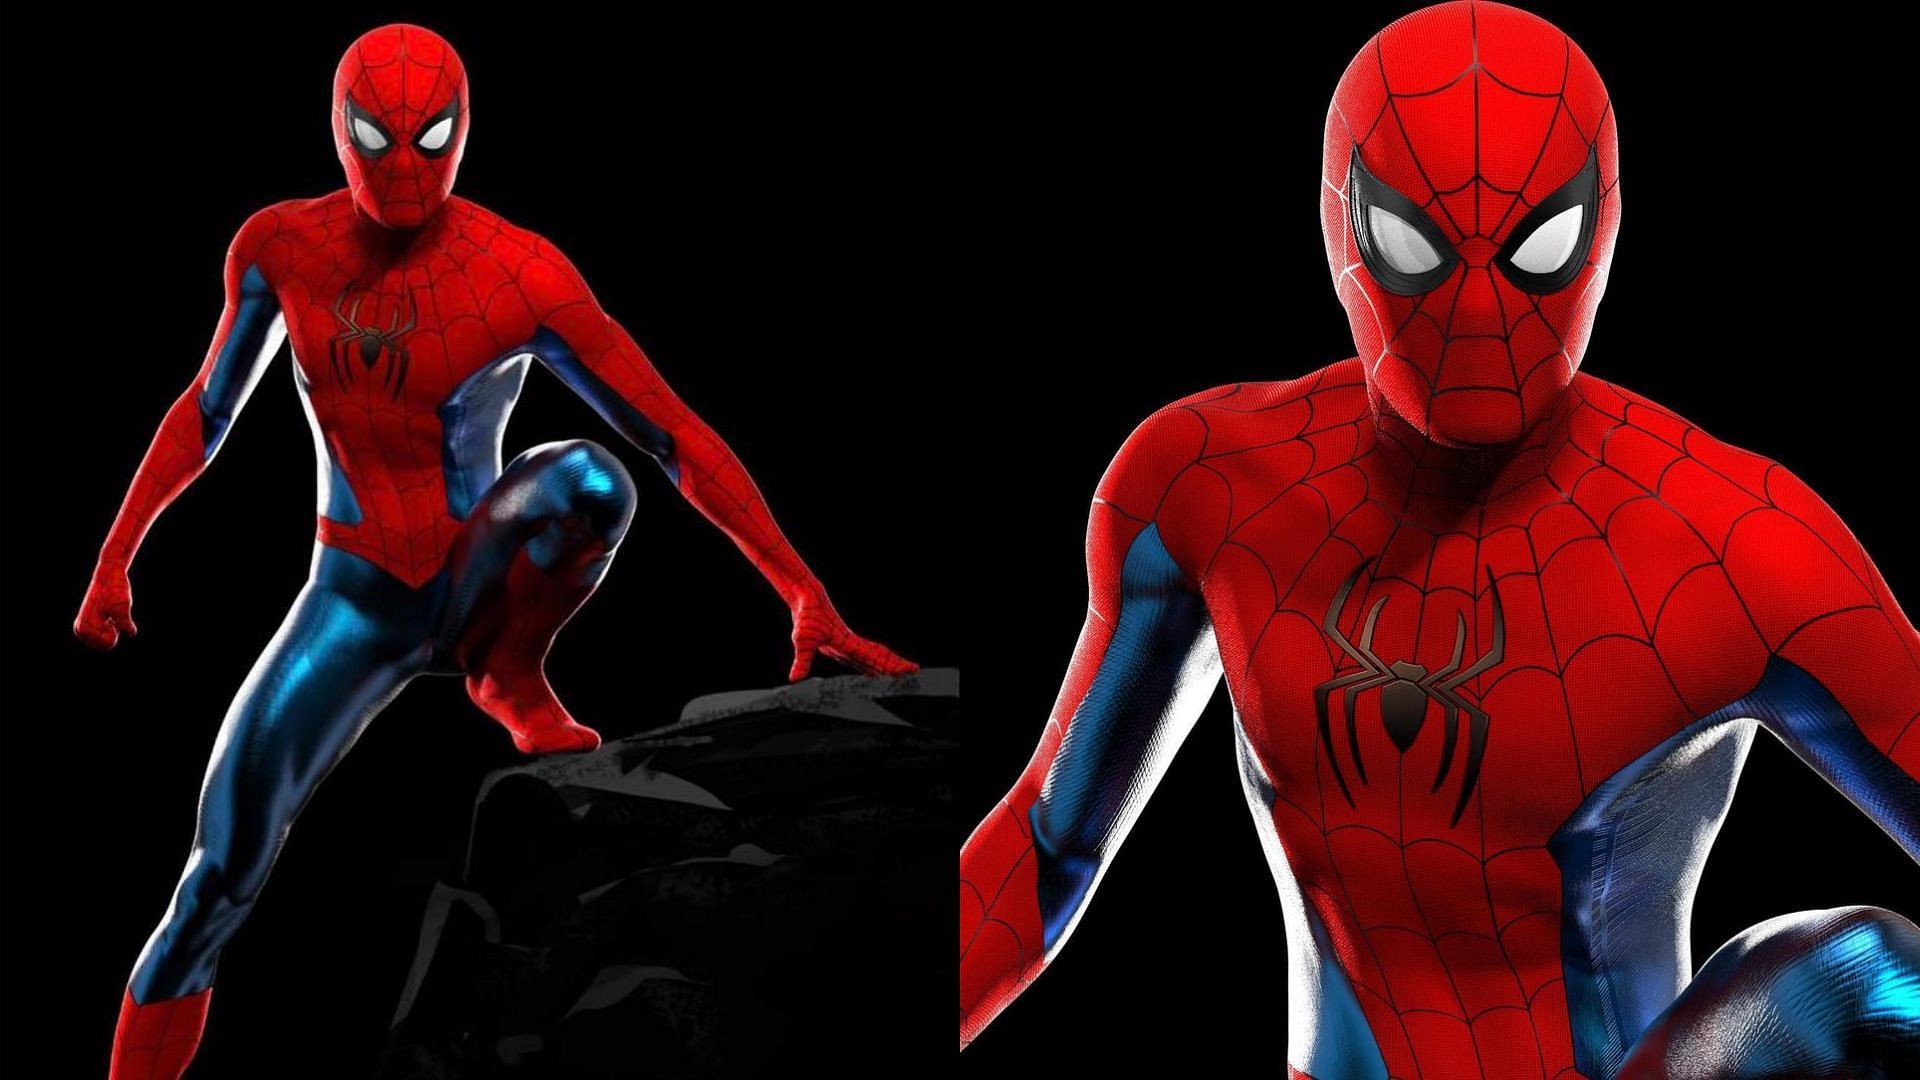 Tom Holland's final suit revealed in Spider-Man: No Way Home concept art